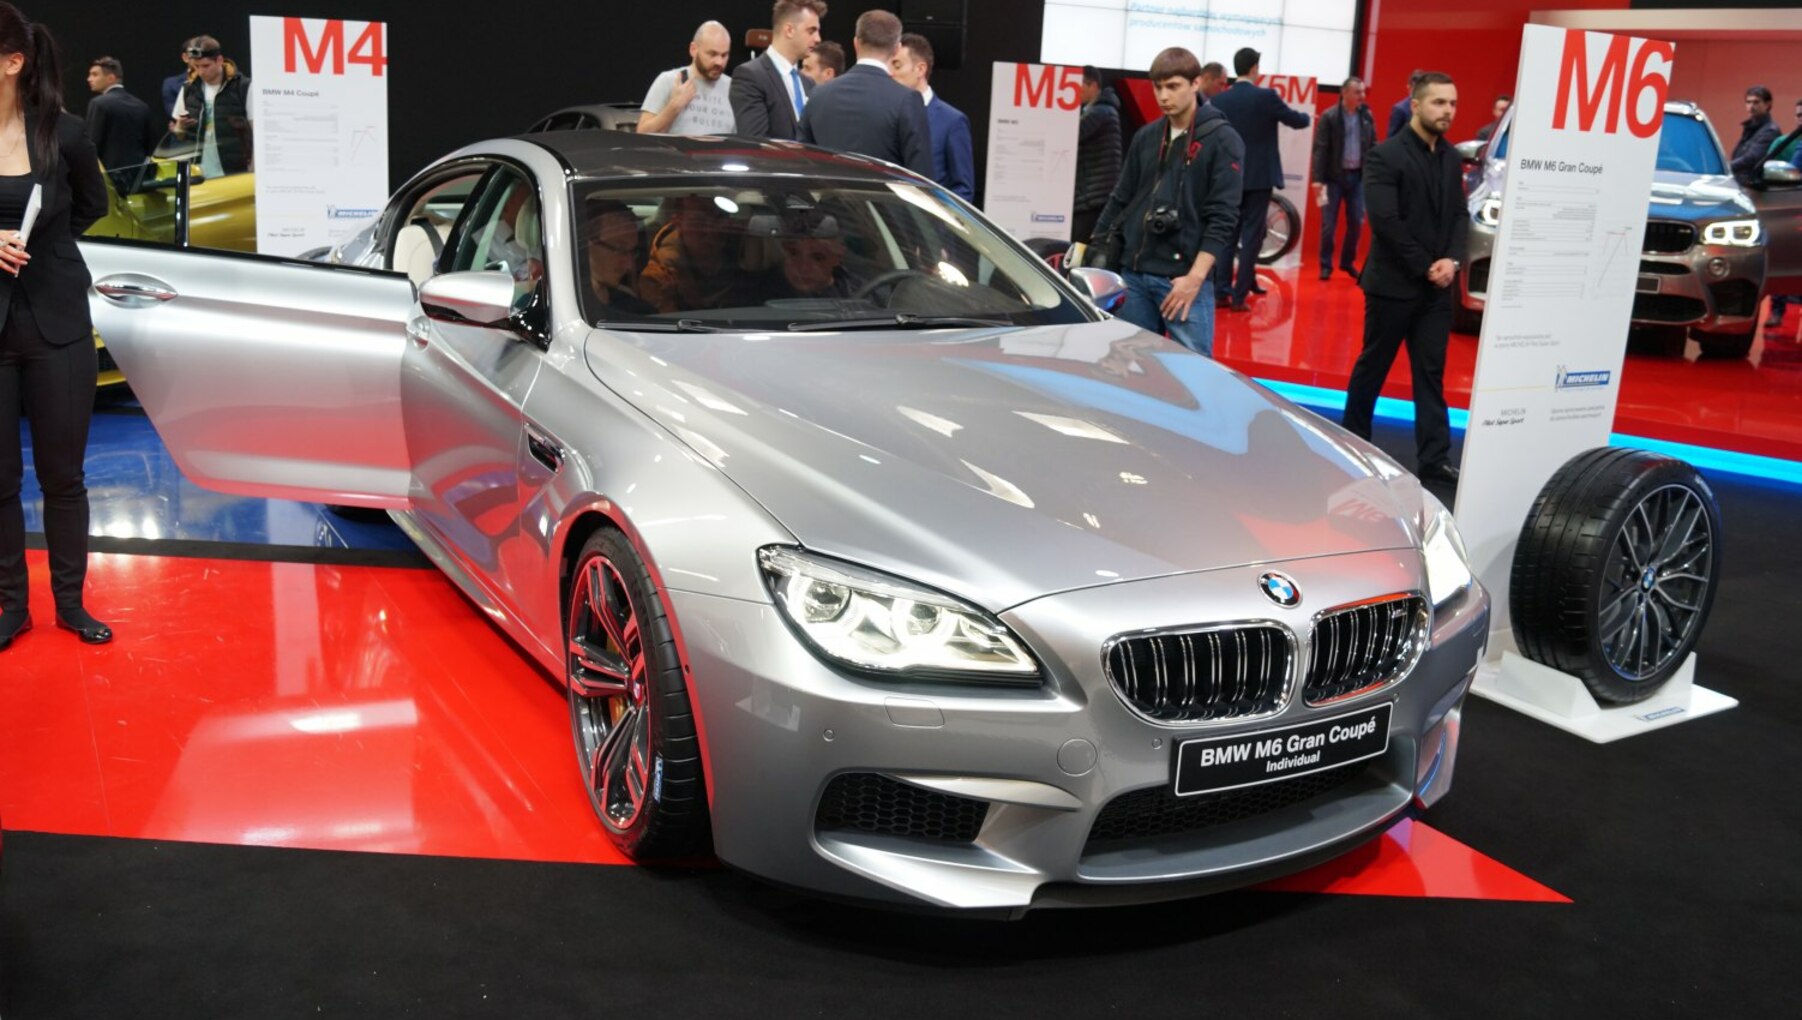 BMW M6 Gran Coupe (F06M LCI, facelift 2014) Competition 4.4 V8 (600 Hp) M DCT 2015, 2016, 2017, 2018 